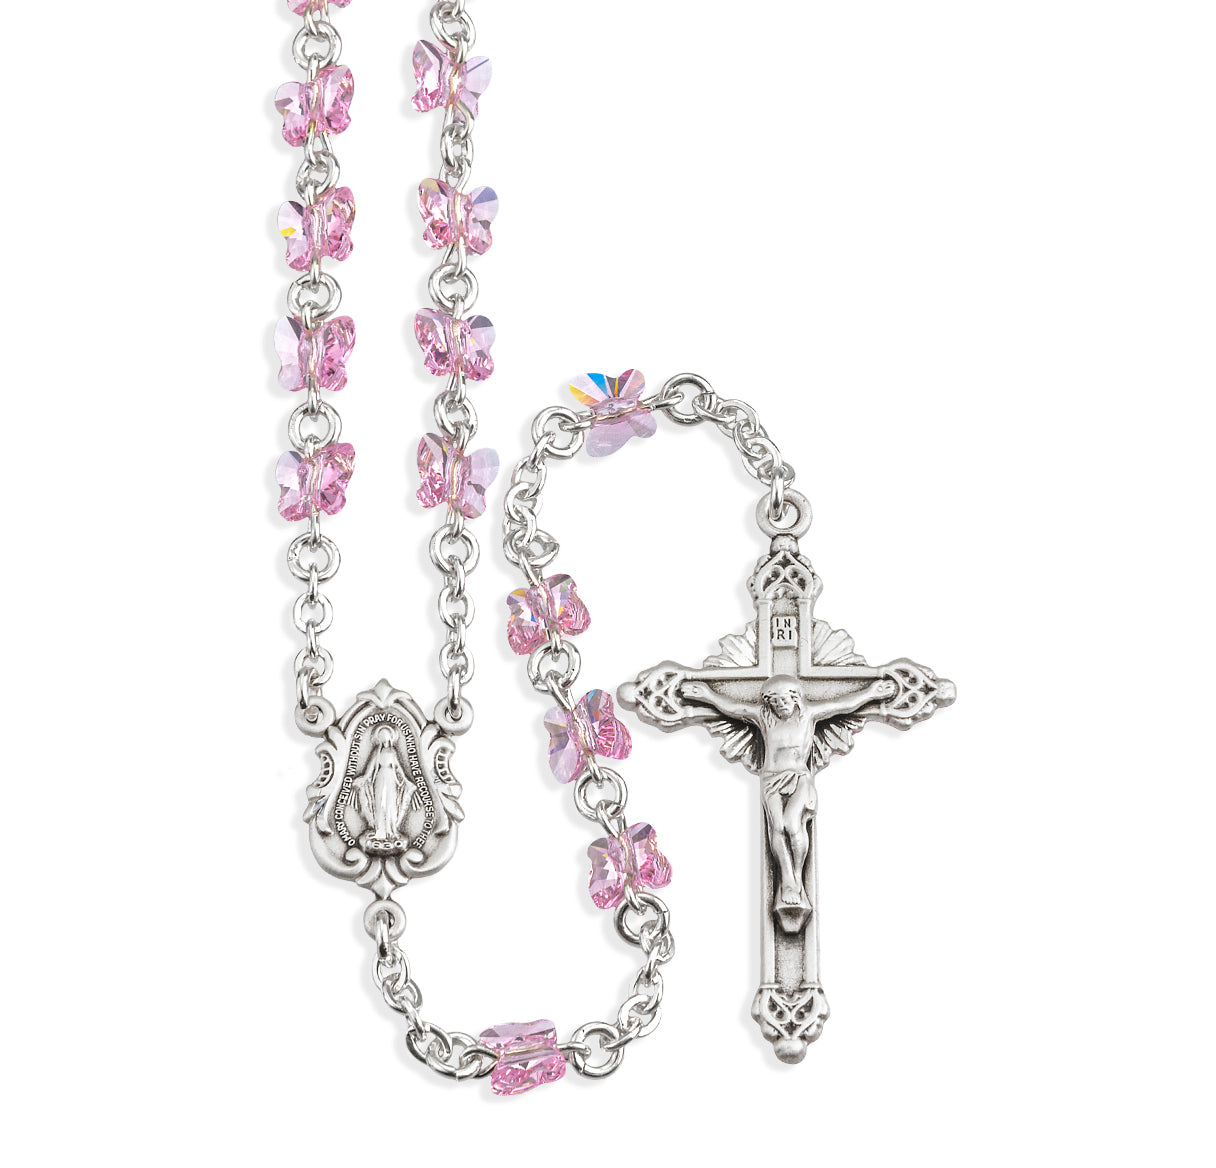 Sterling Silver Rosary Hand Made with 6mm Swarovski Crystal 6mm Light Rose Butterfly Beads by HMH